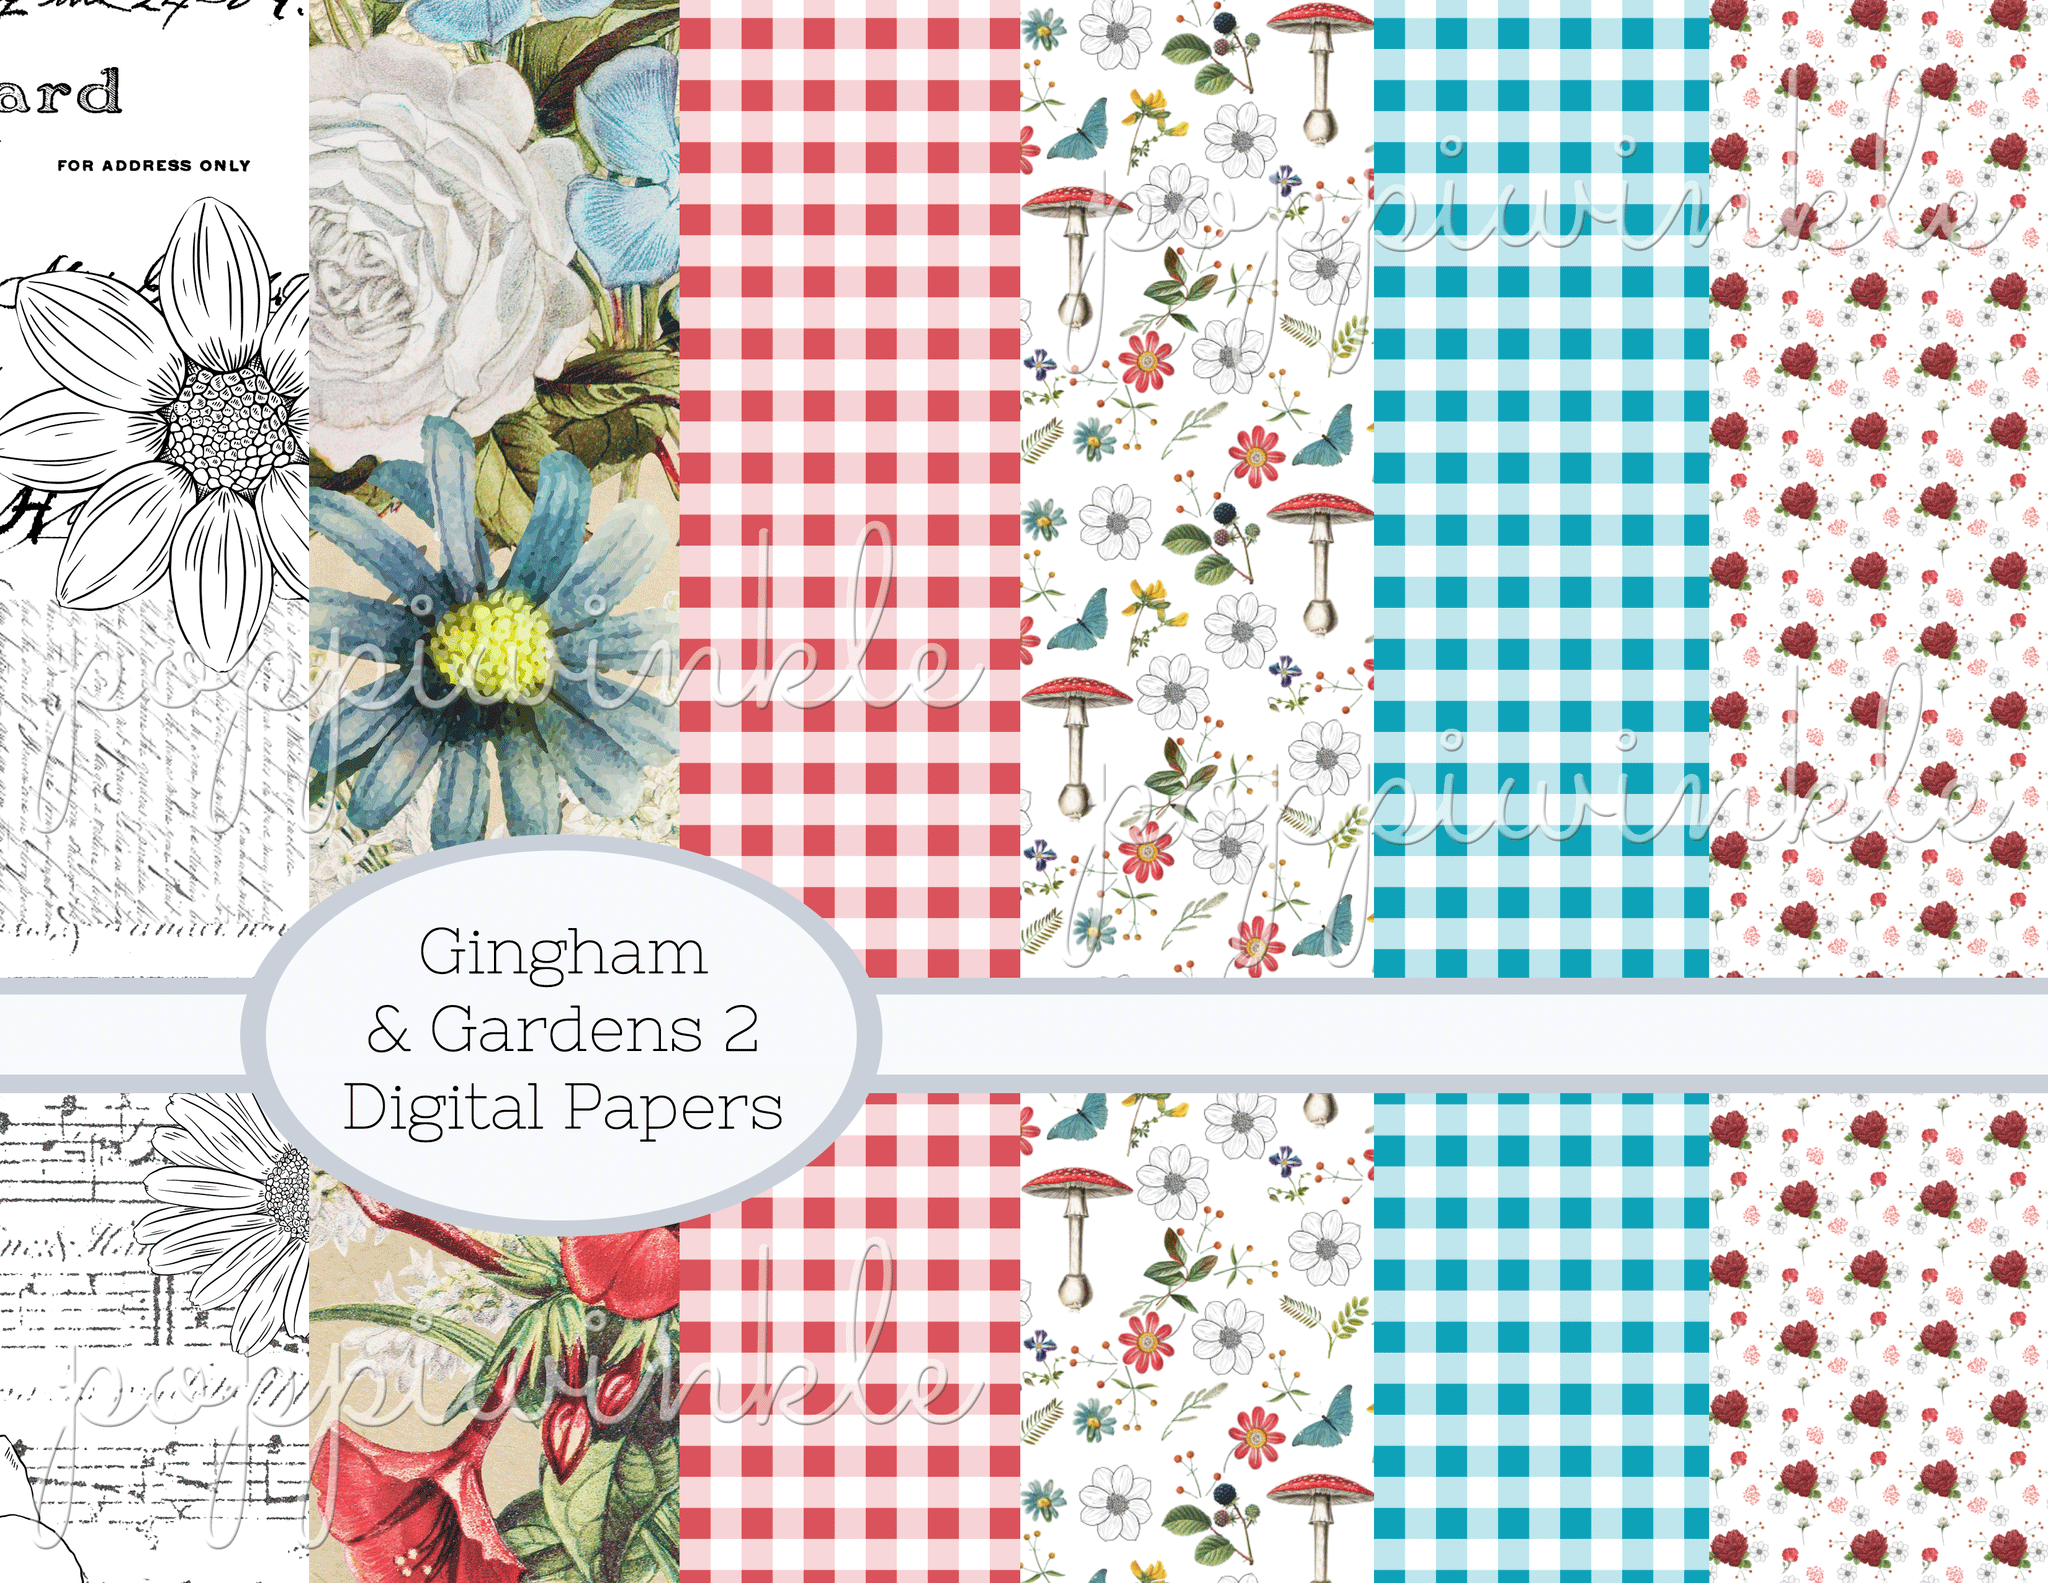 6 digital papers: Black and white, Large scale floral collage in red, white and blue, red & white gingham, medium scale floral in red, white and blue, blue and white gingham, small scale floral in red and white.